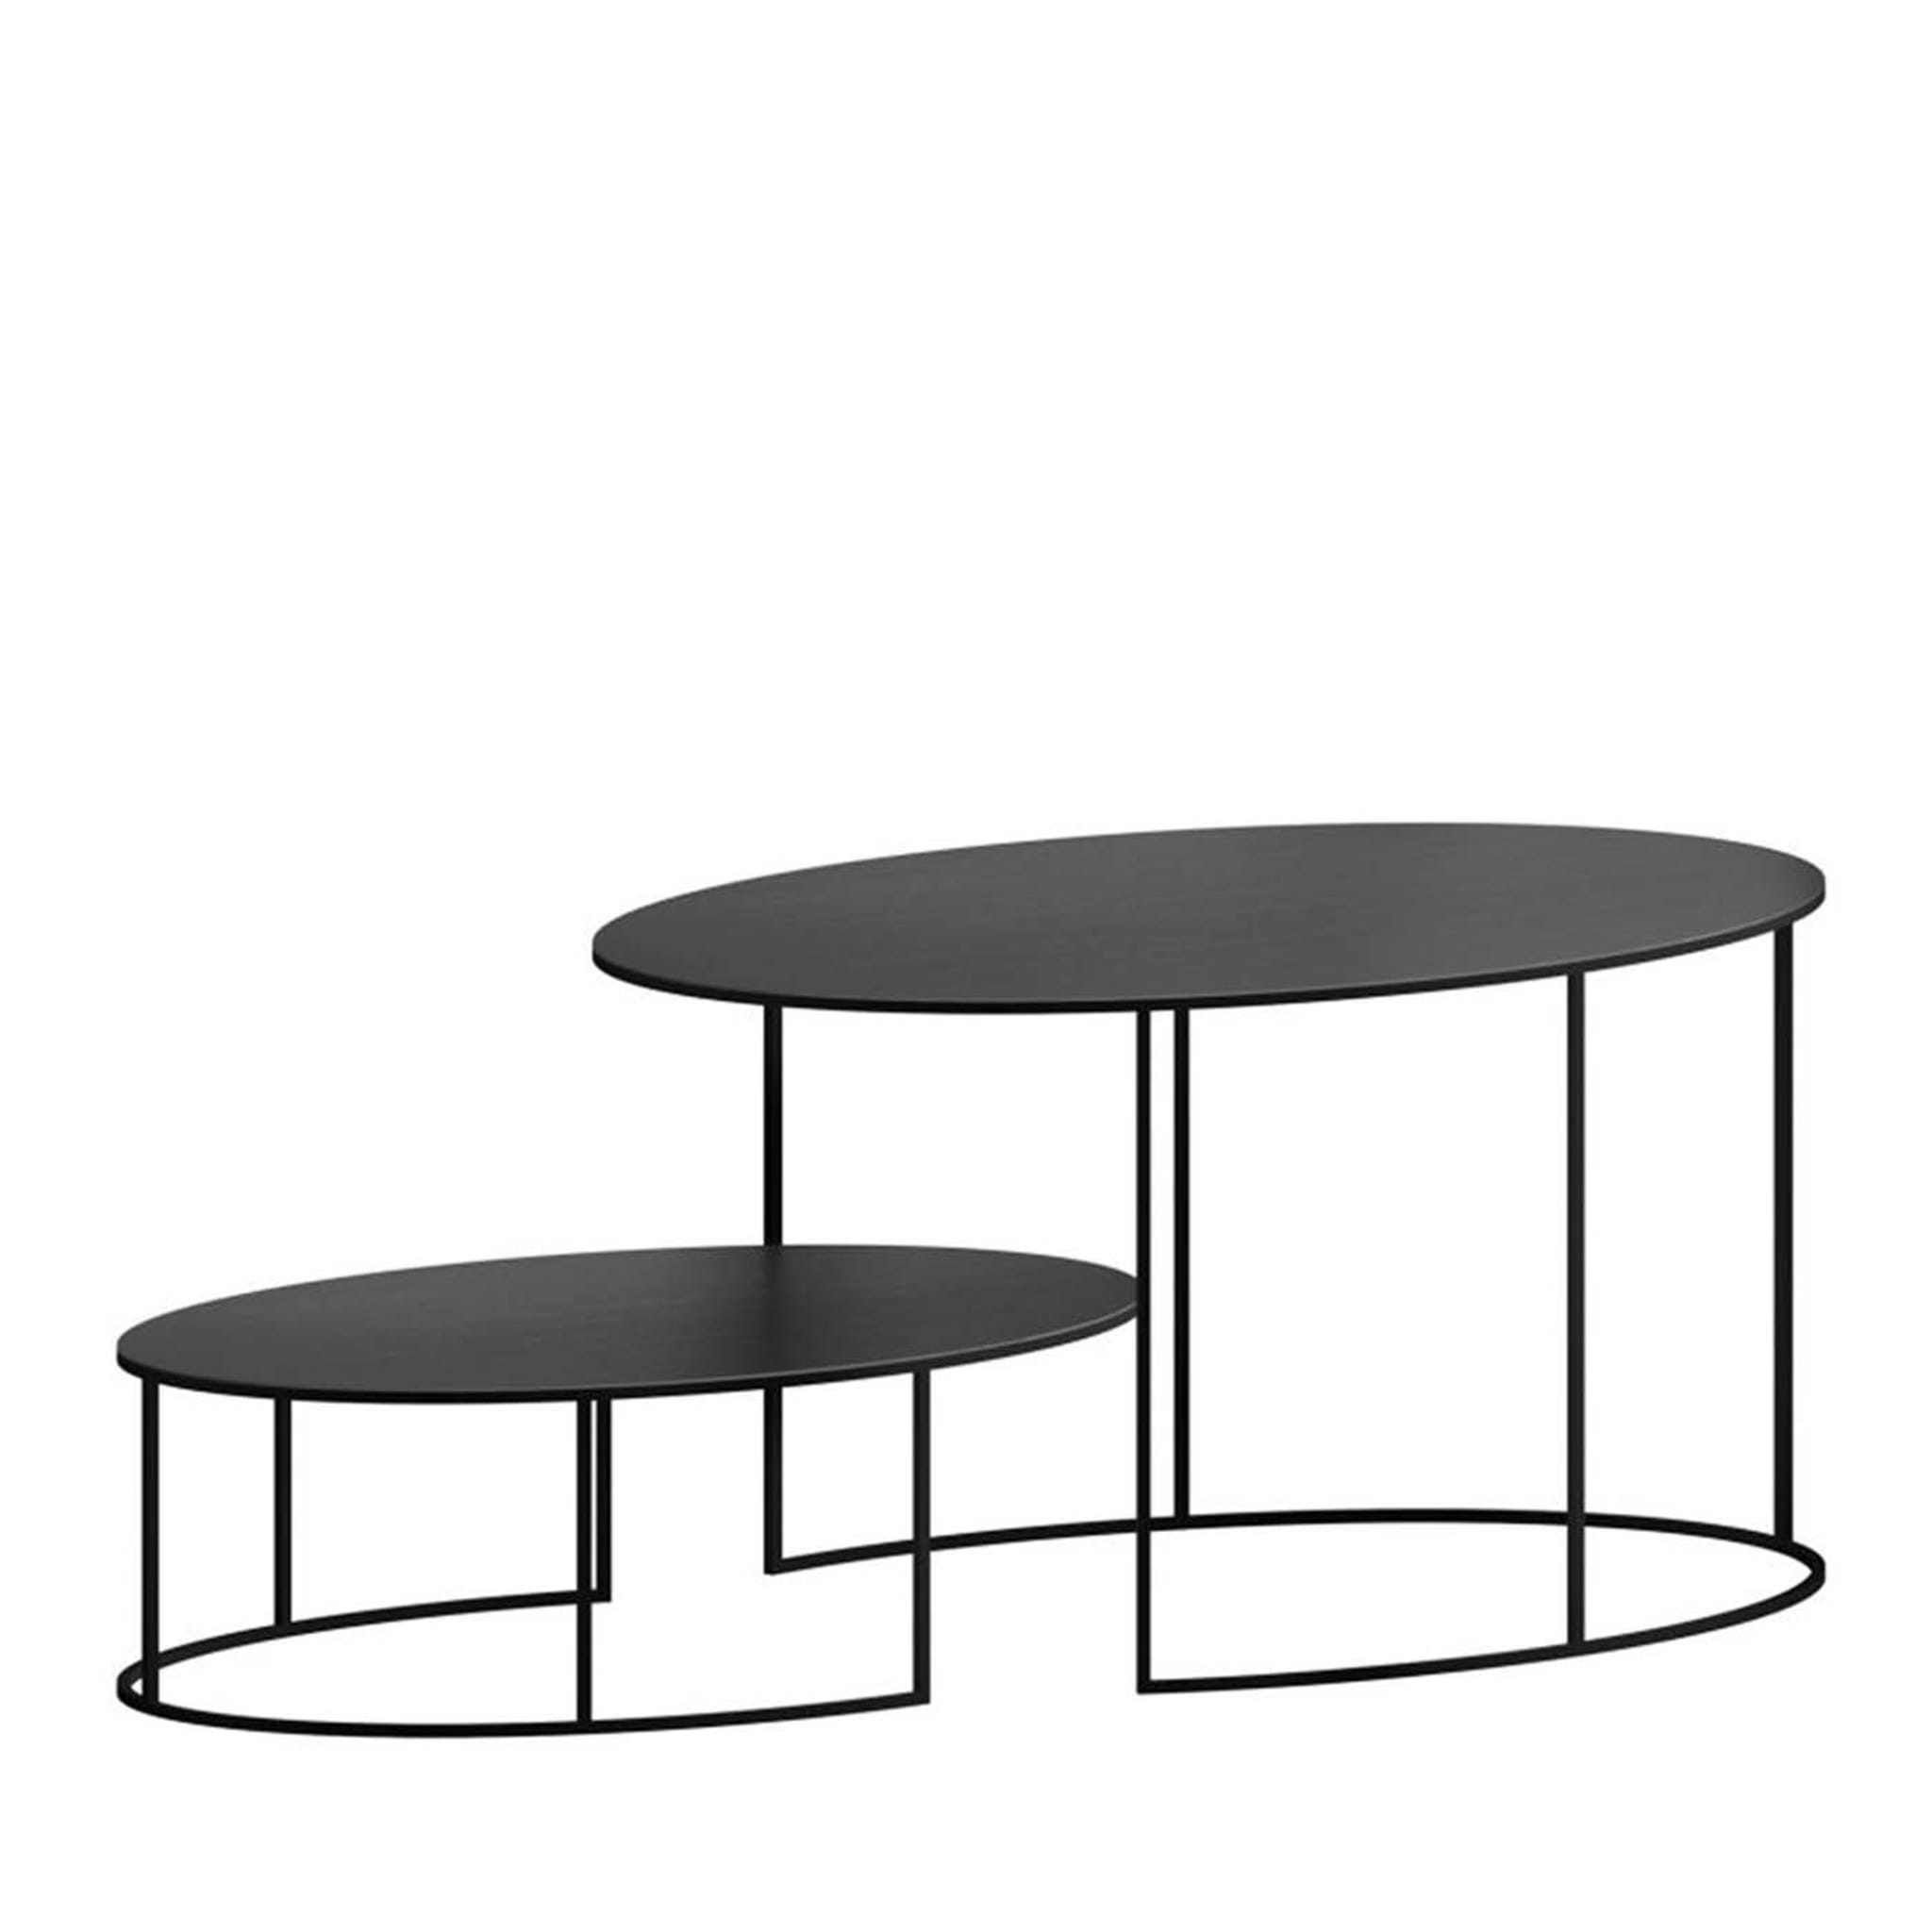 Slim Irony Set of 2 Oval Tables by Maurizio Peregalli - Main view